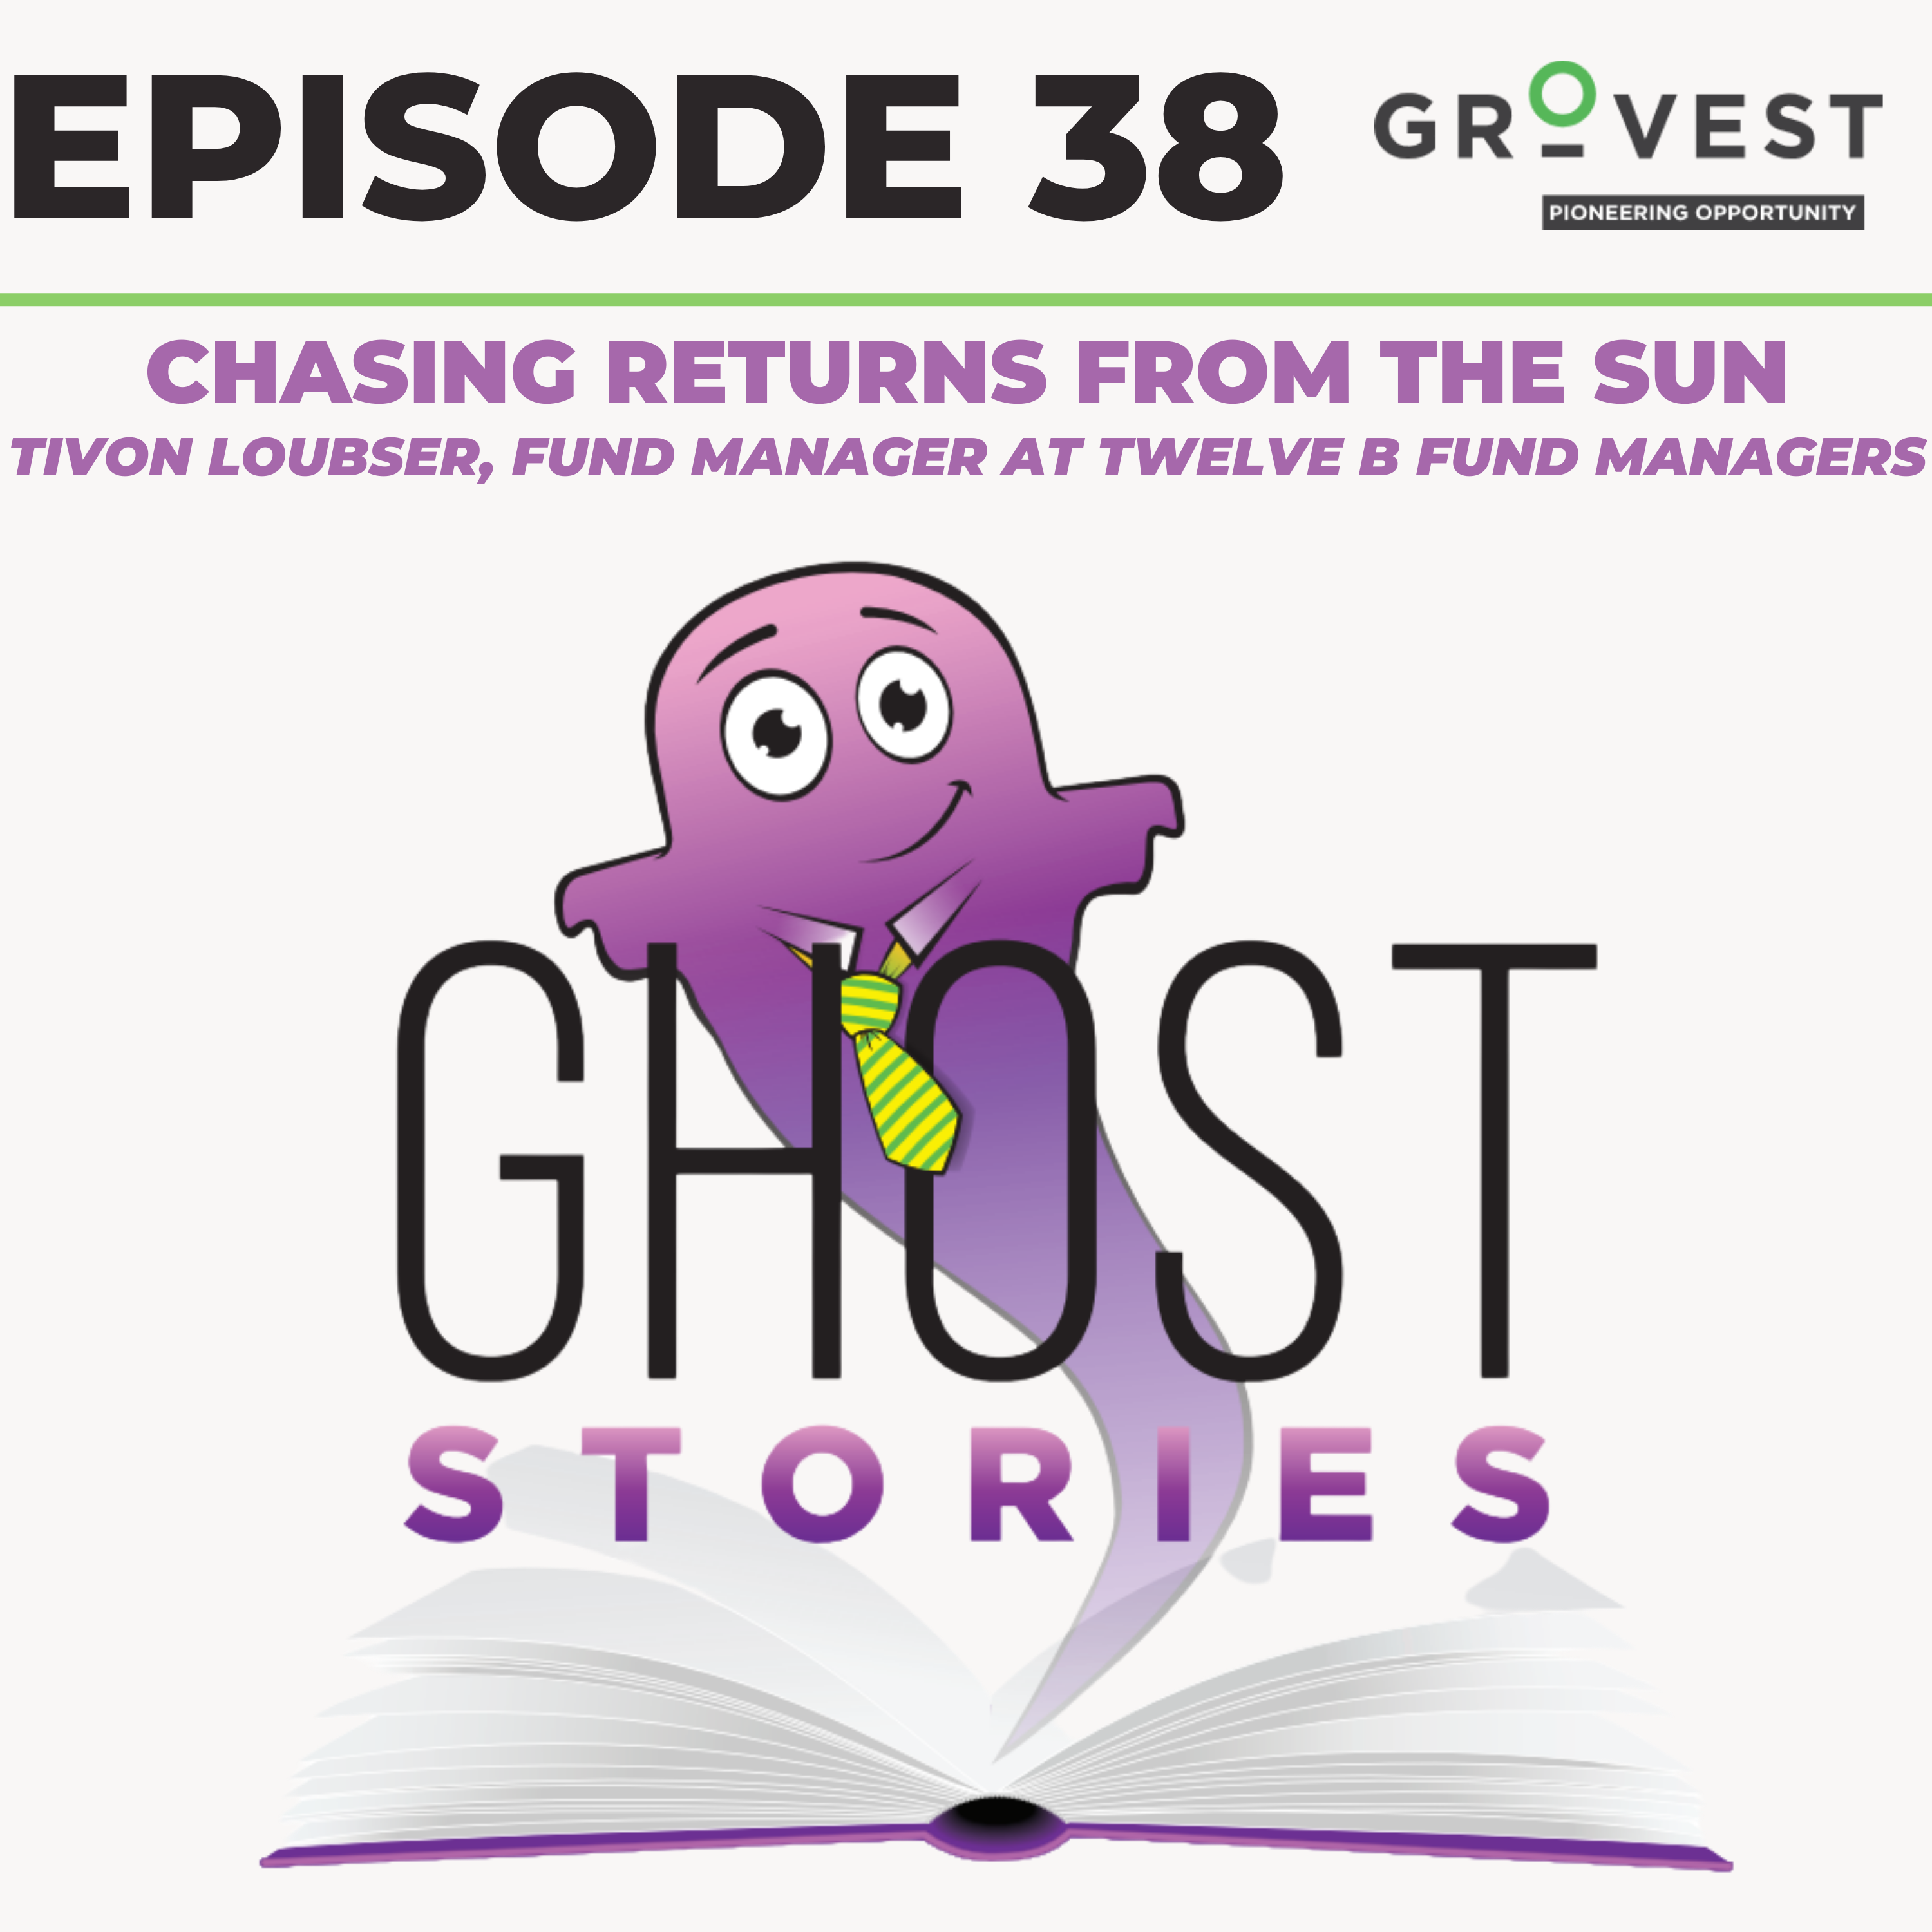 Ghost Stories Ep38: Chasing Returns from the Sun (Tivon Loubser, Fund Manager Twelve B at Grovest)